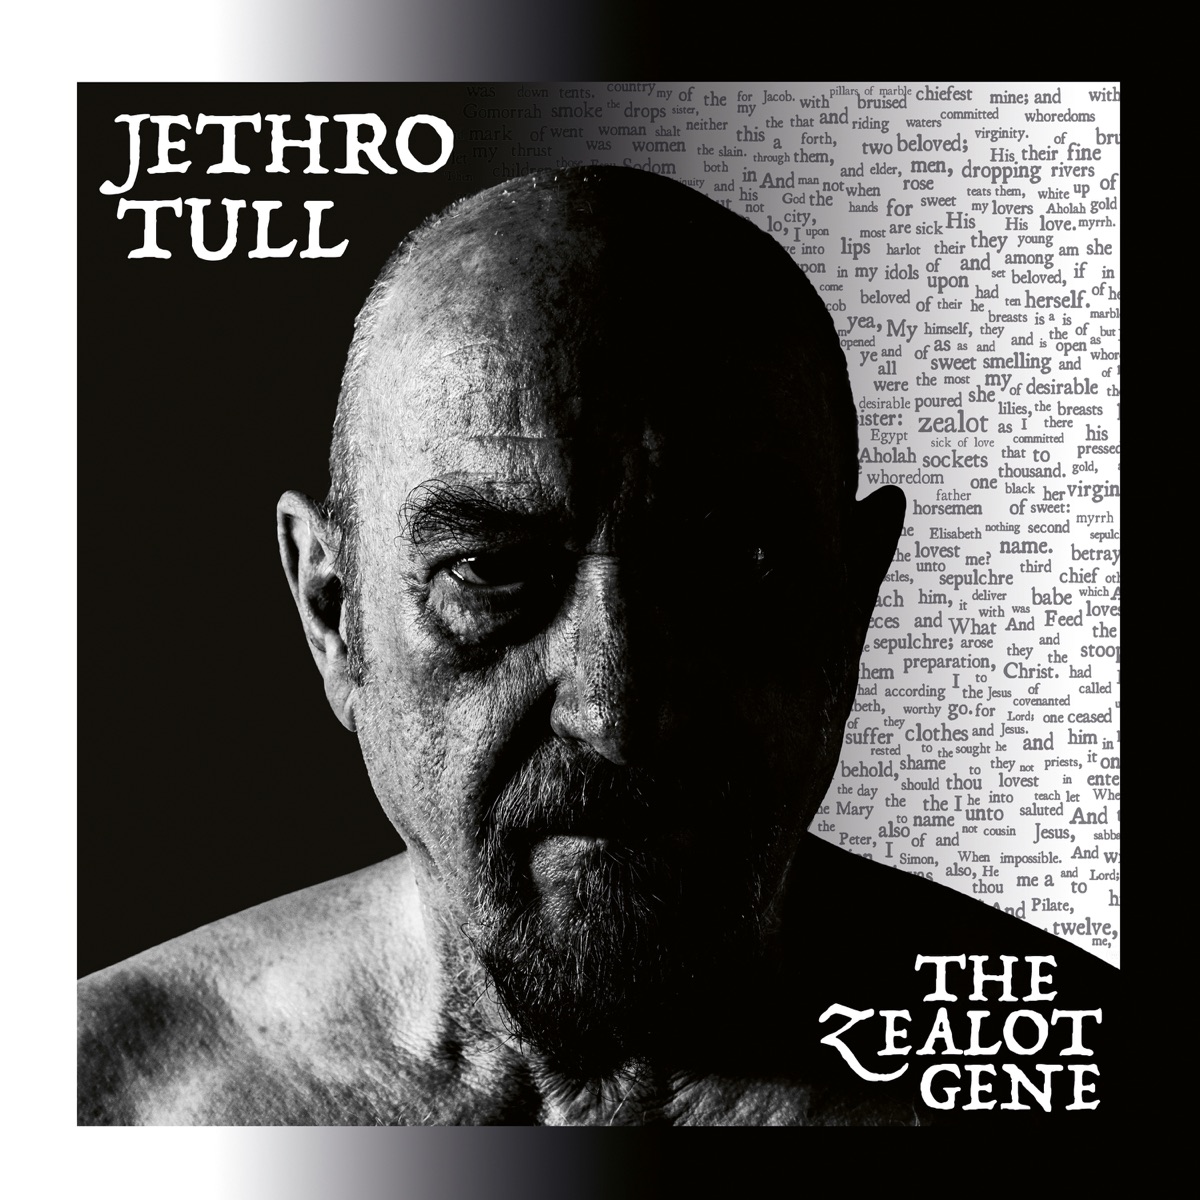 Jethro Tull - Living In The Past (Supersonic, 27.03.1976) 